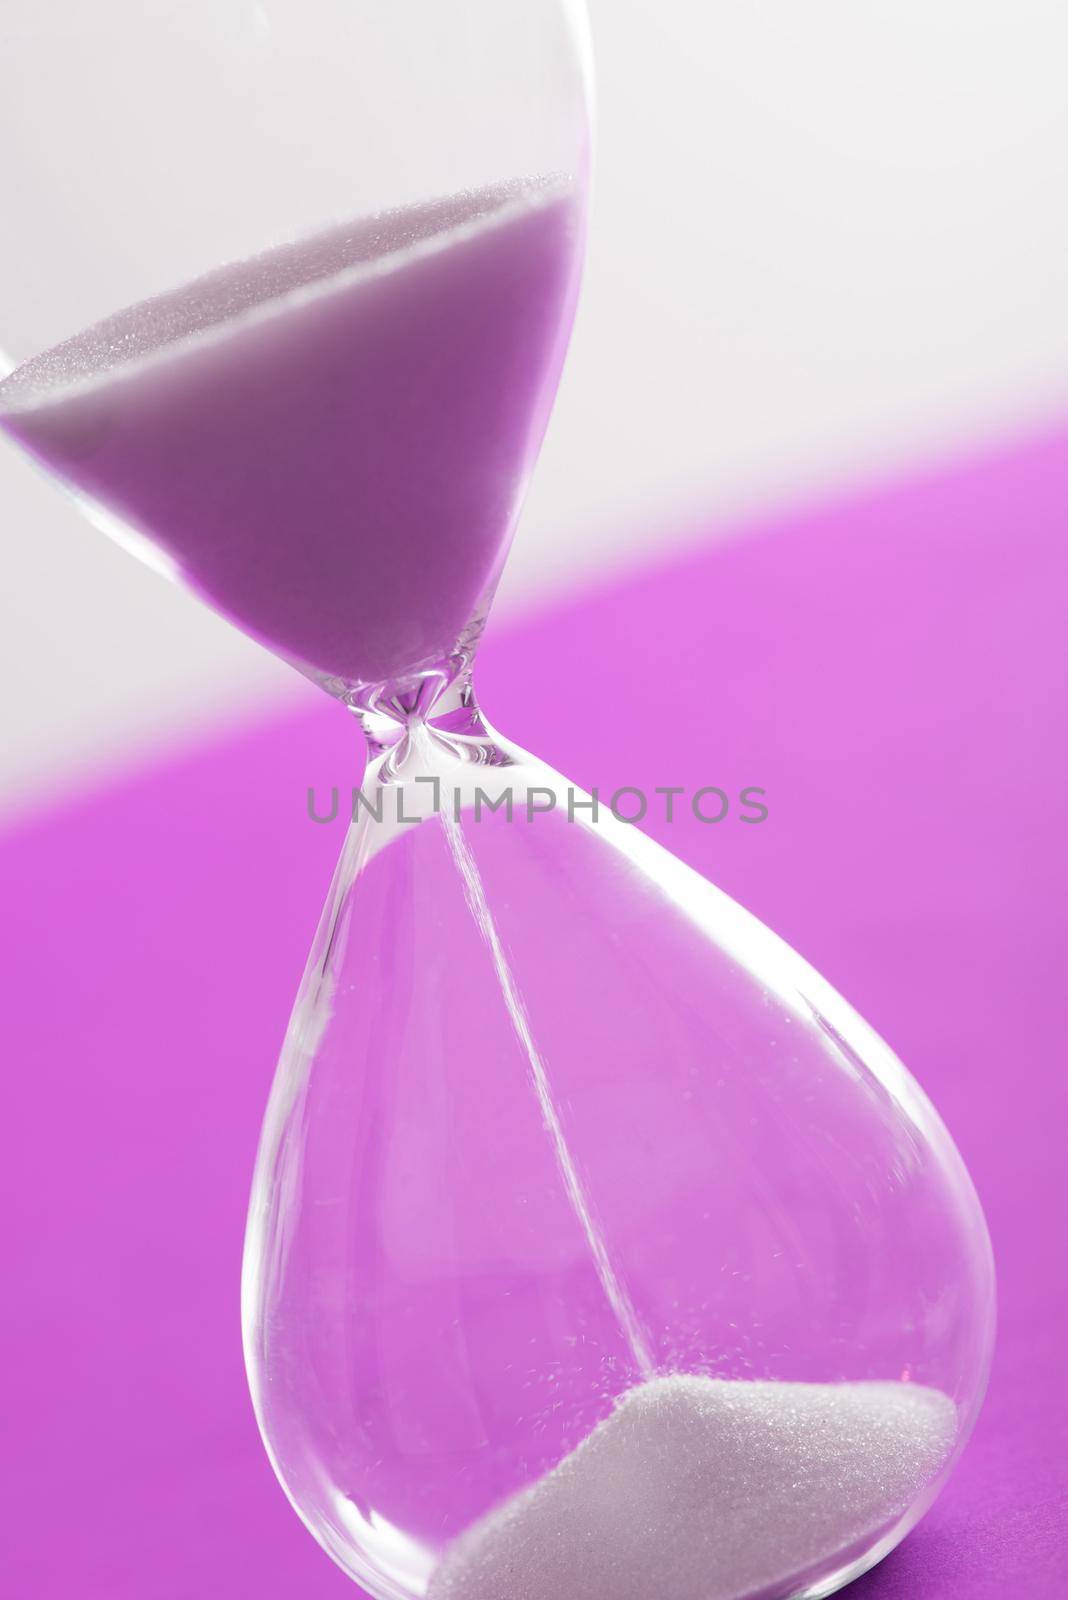 Sand running through an hourglass measuring the passing time counting down to a deadline over a bright pink background